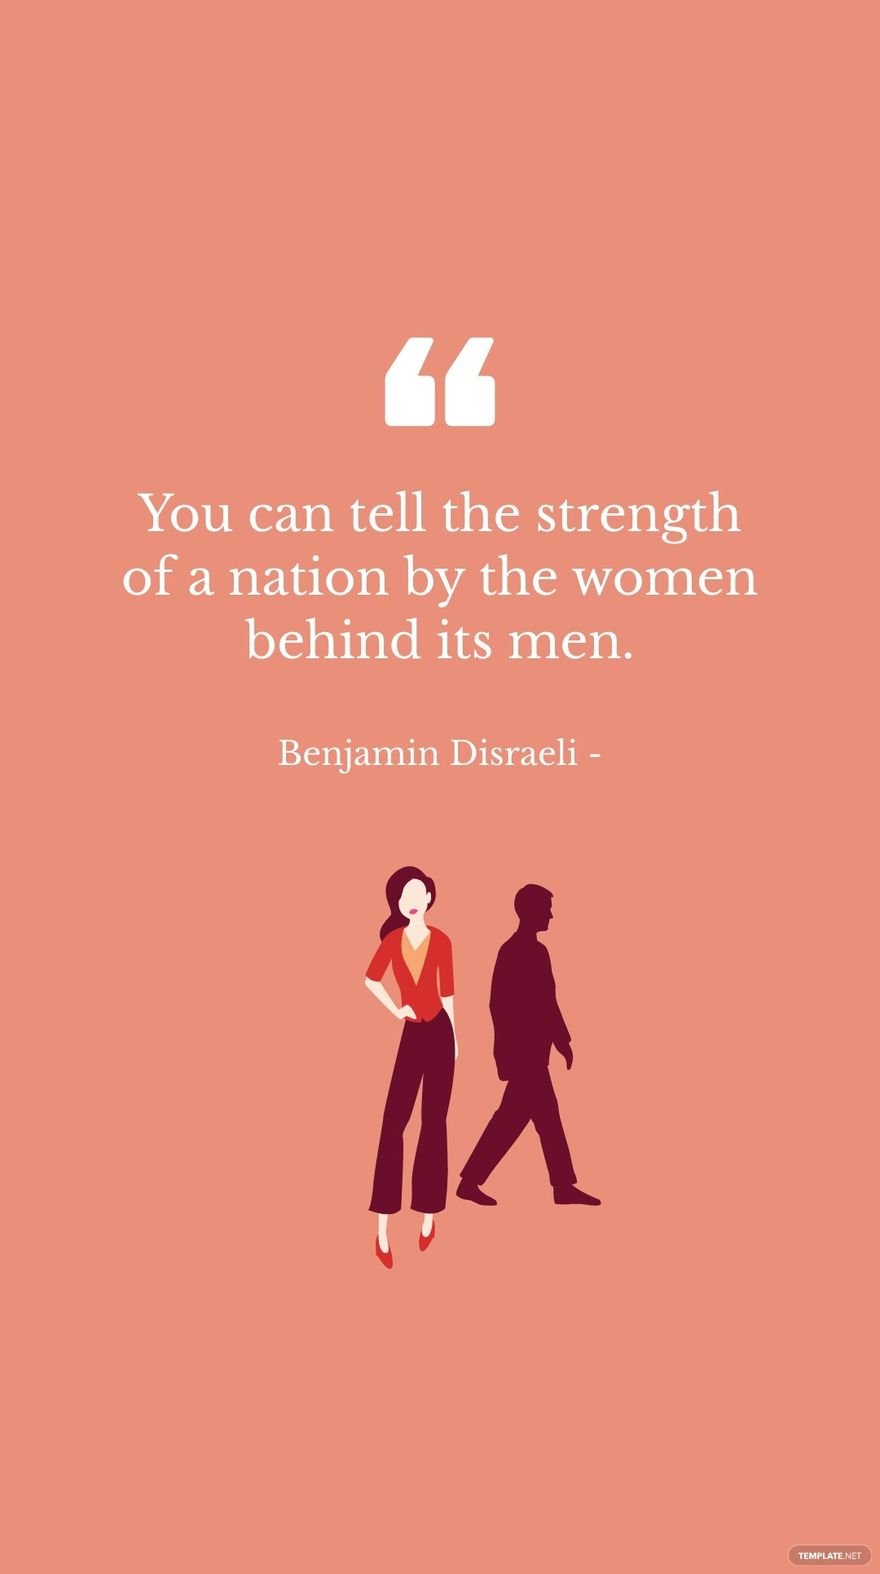 Benjamin Disraeli - You can tell the strength of a nation by the women behind its men.